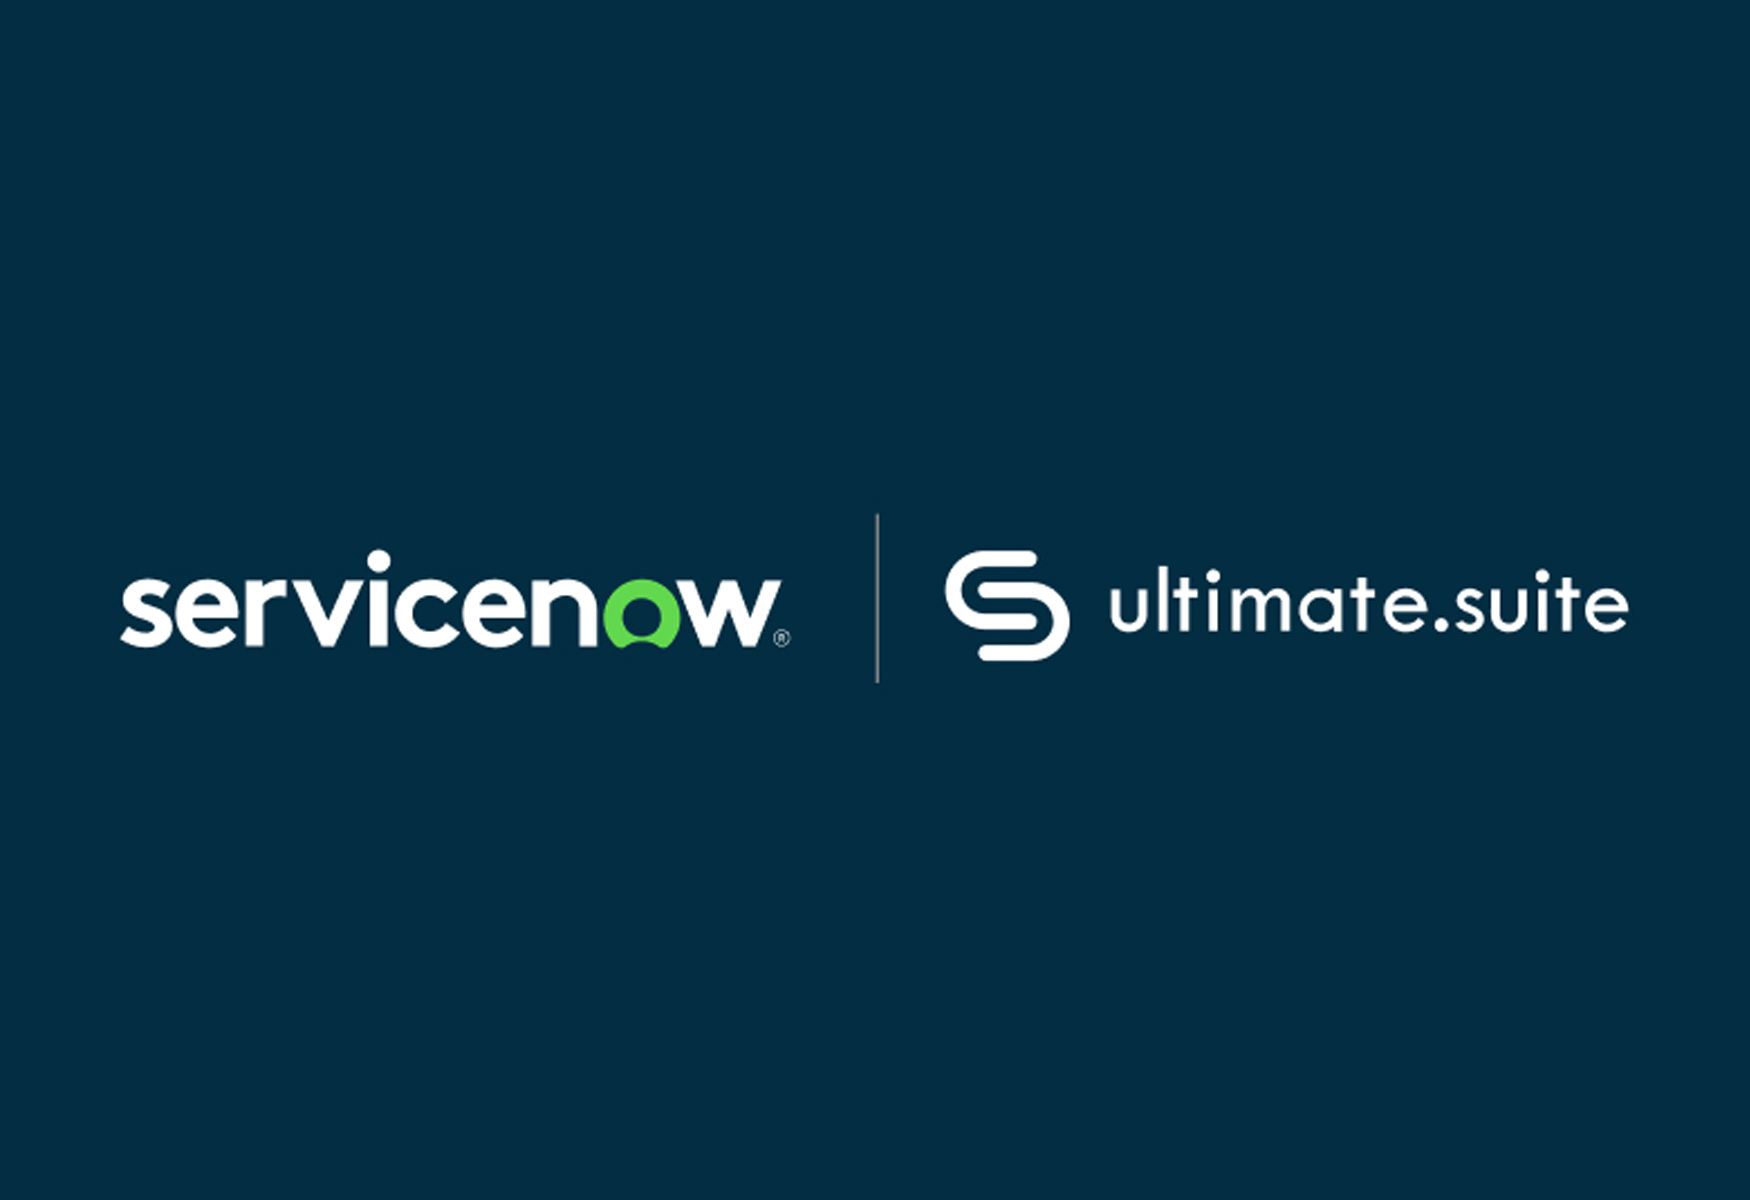 servicenow-enhances-process-mining-capabilities-with-ultimatesuite-acquisition